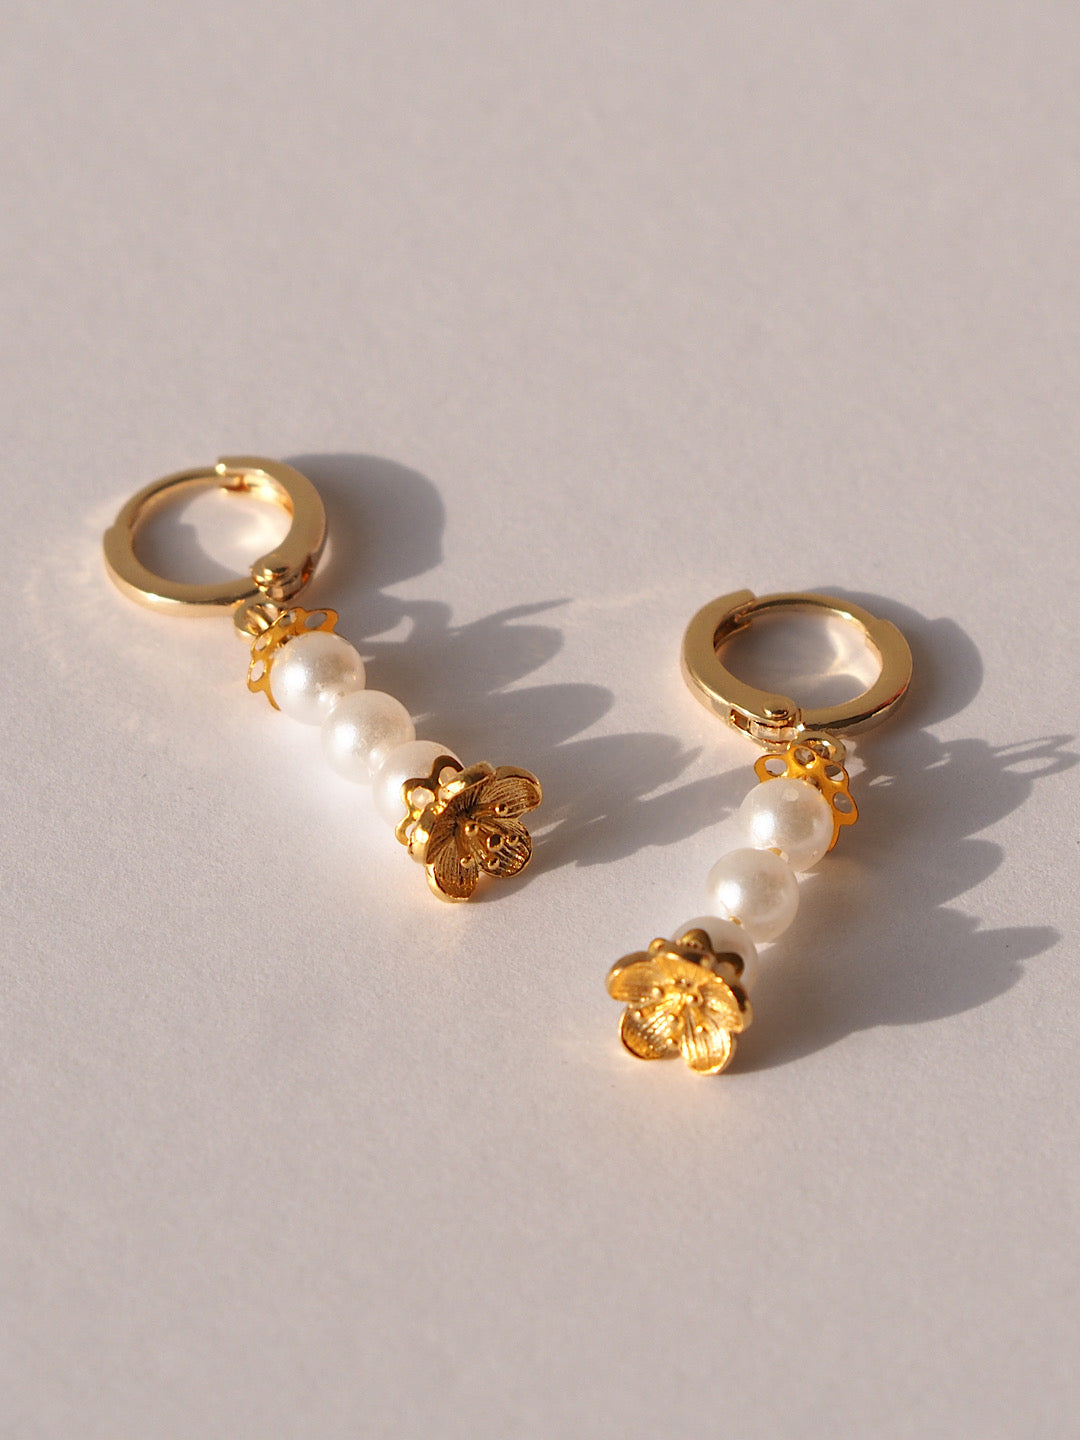 Dorothea Pearls, 24k gold-plated